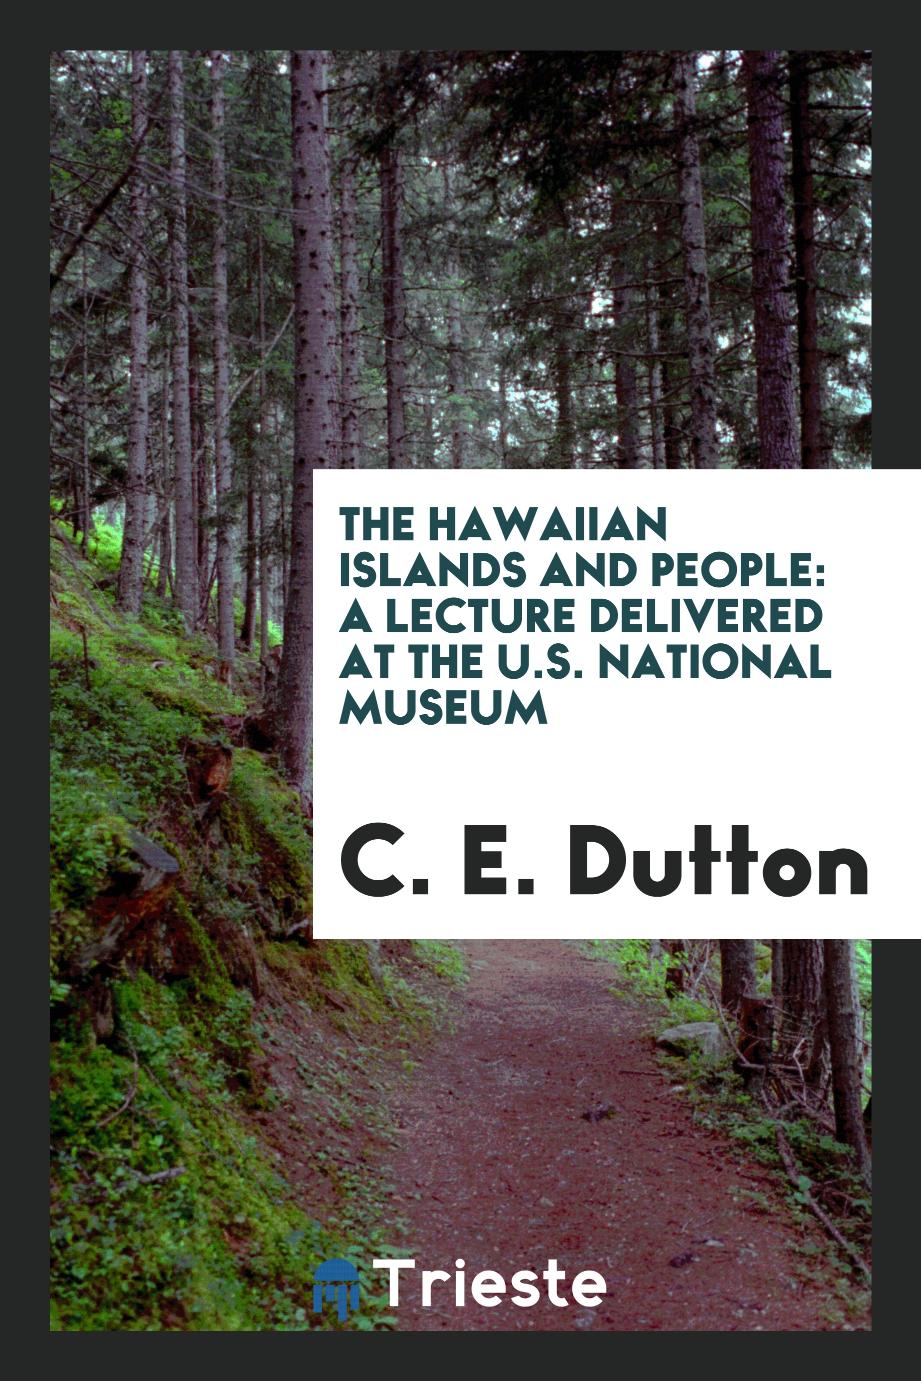 The Hawaiian Islands and People: A Lecture Delivered at the U.S. National Museum